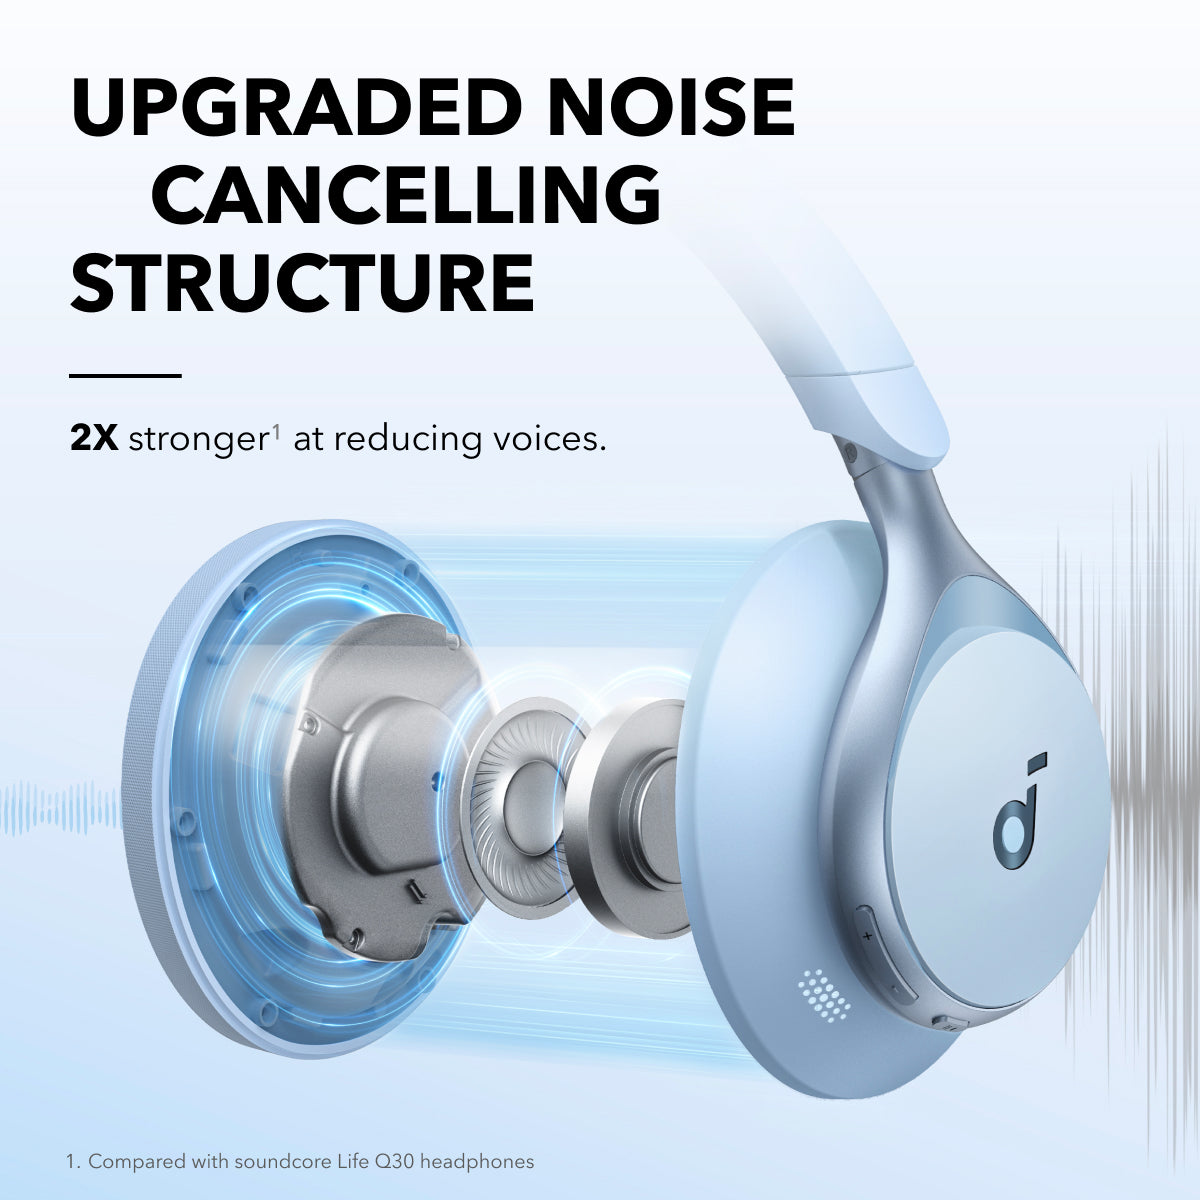 Anker's new Soundcore Space One headphones rock improved ANC at $80 (Save  $20)